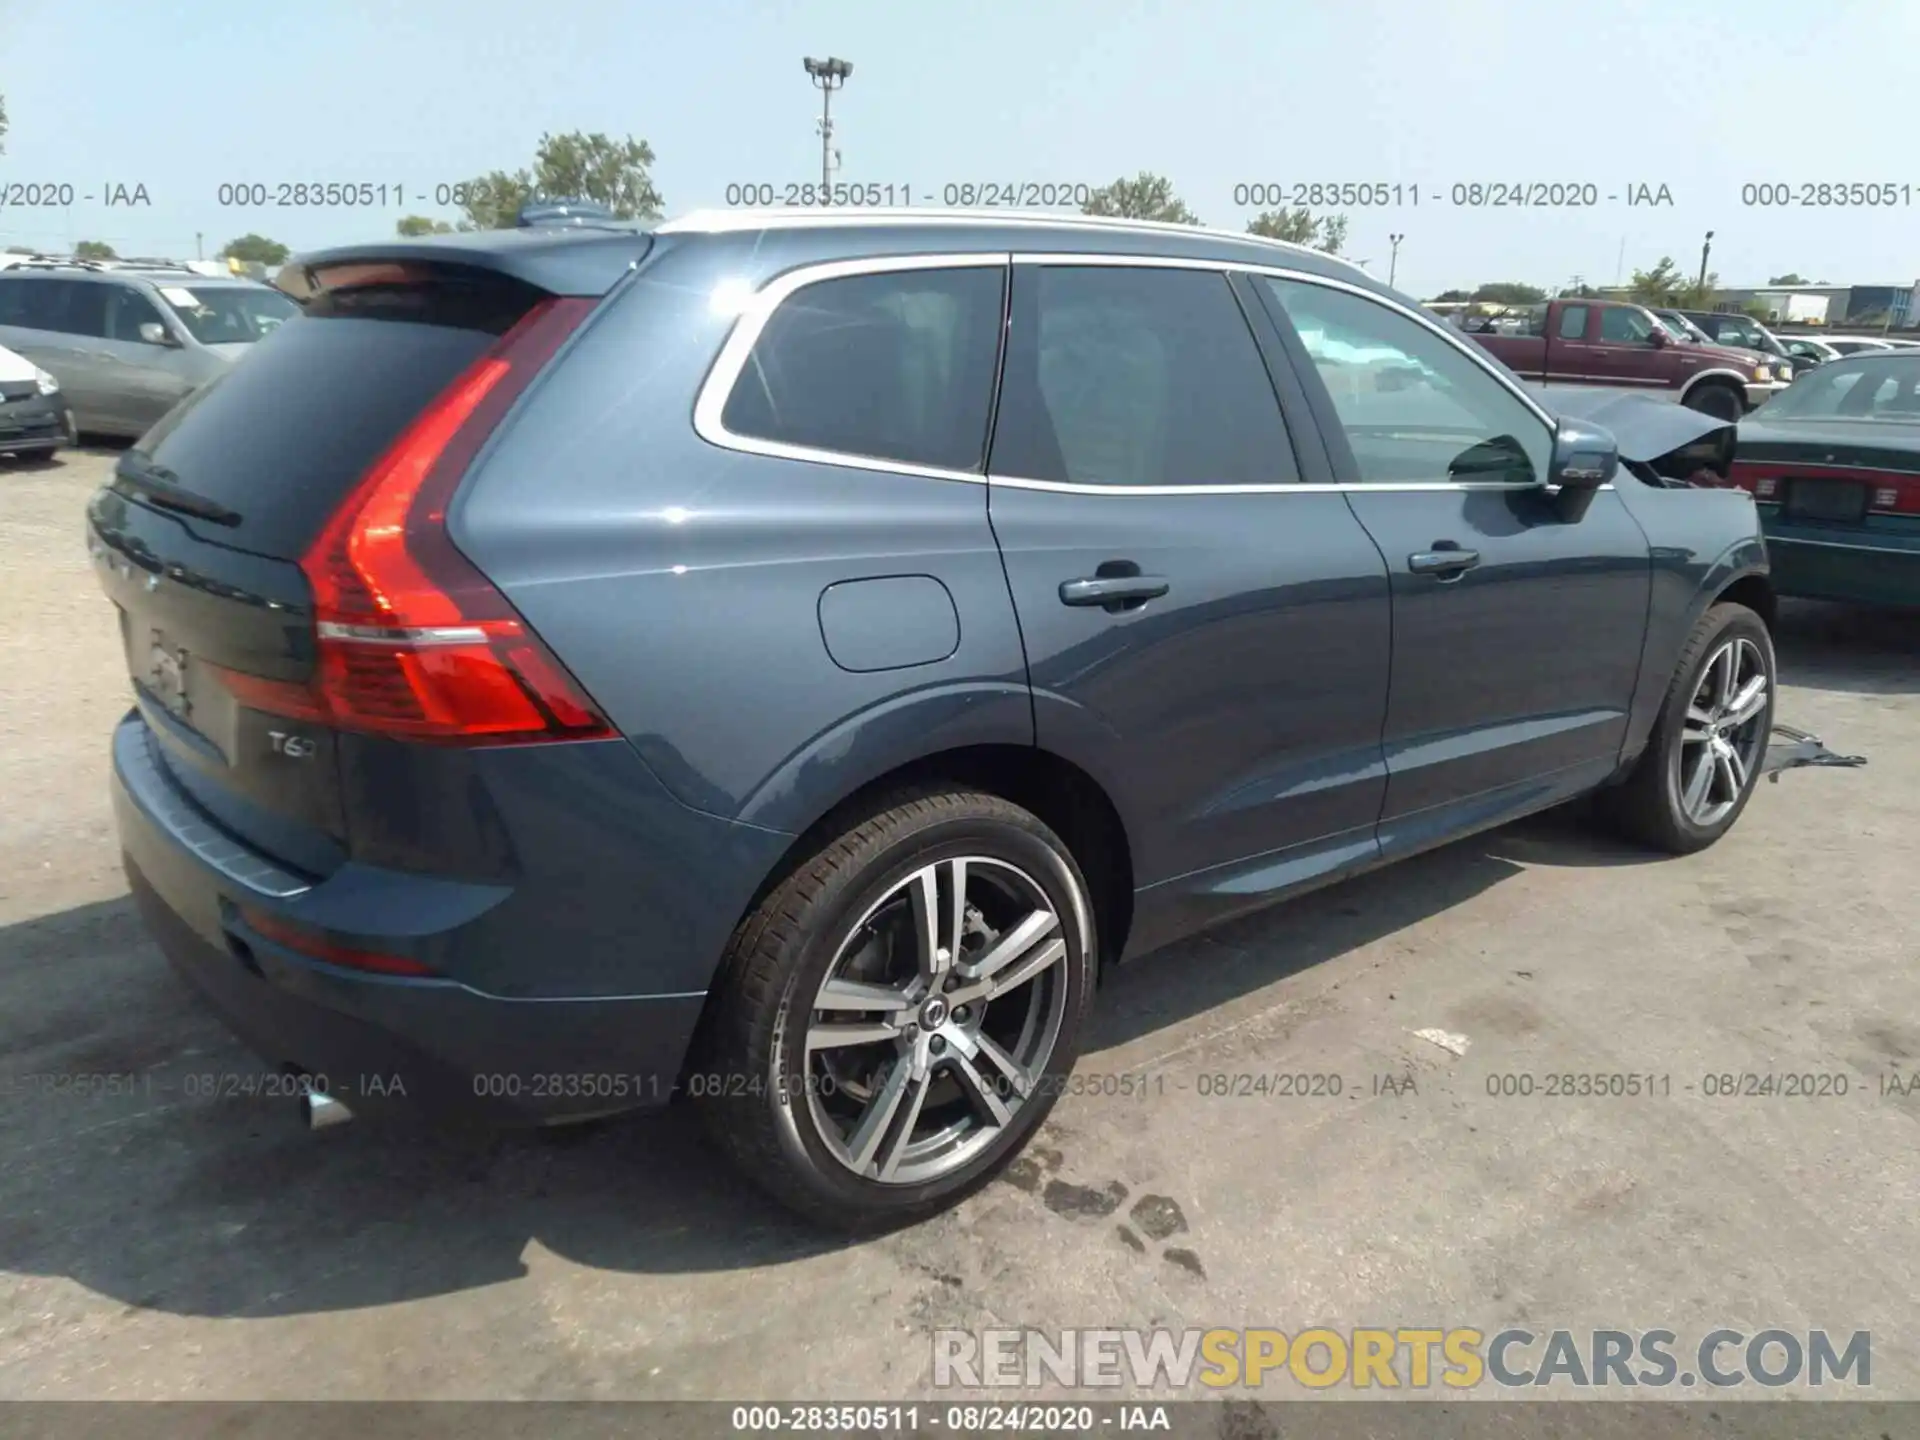 4 Photograph of a damaged car YV4A22RK8L1482842 VOLVO XC60 2020